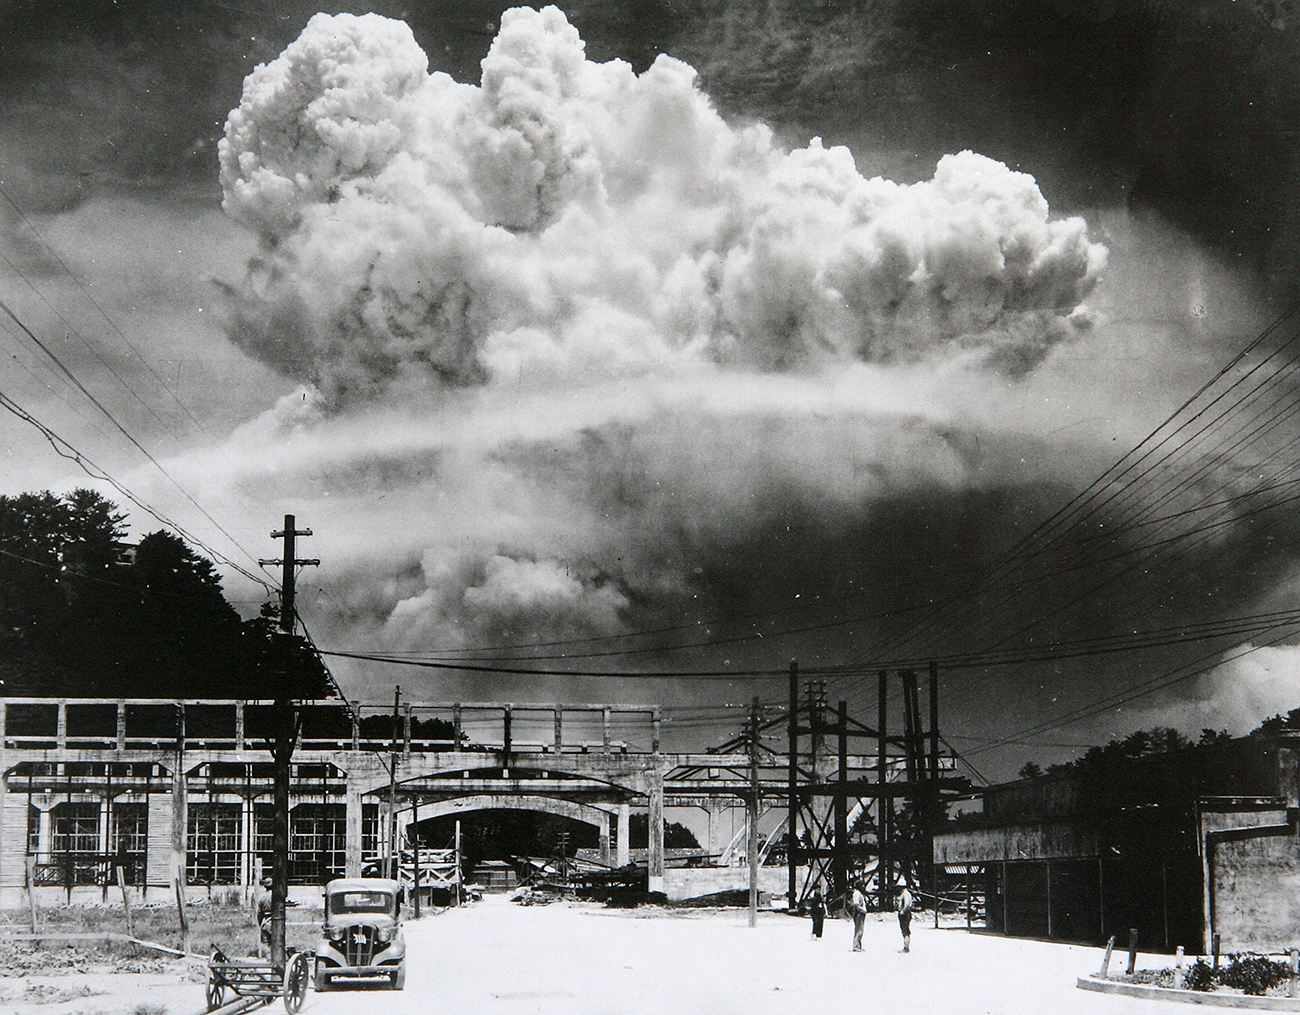 View of the radioactive plume from the bomb dropped on Nagasaki City, as seen from 9.6 km away, in Koyagi-jima, Japan, August 9, 1945. The US B-29 superfortress Bockscar dropped the atomic bomb nicknamed 'Fat Man,' which detonated above the ground, on northern part of Nagasaki City just after 11am.